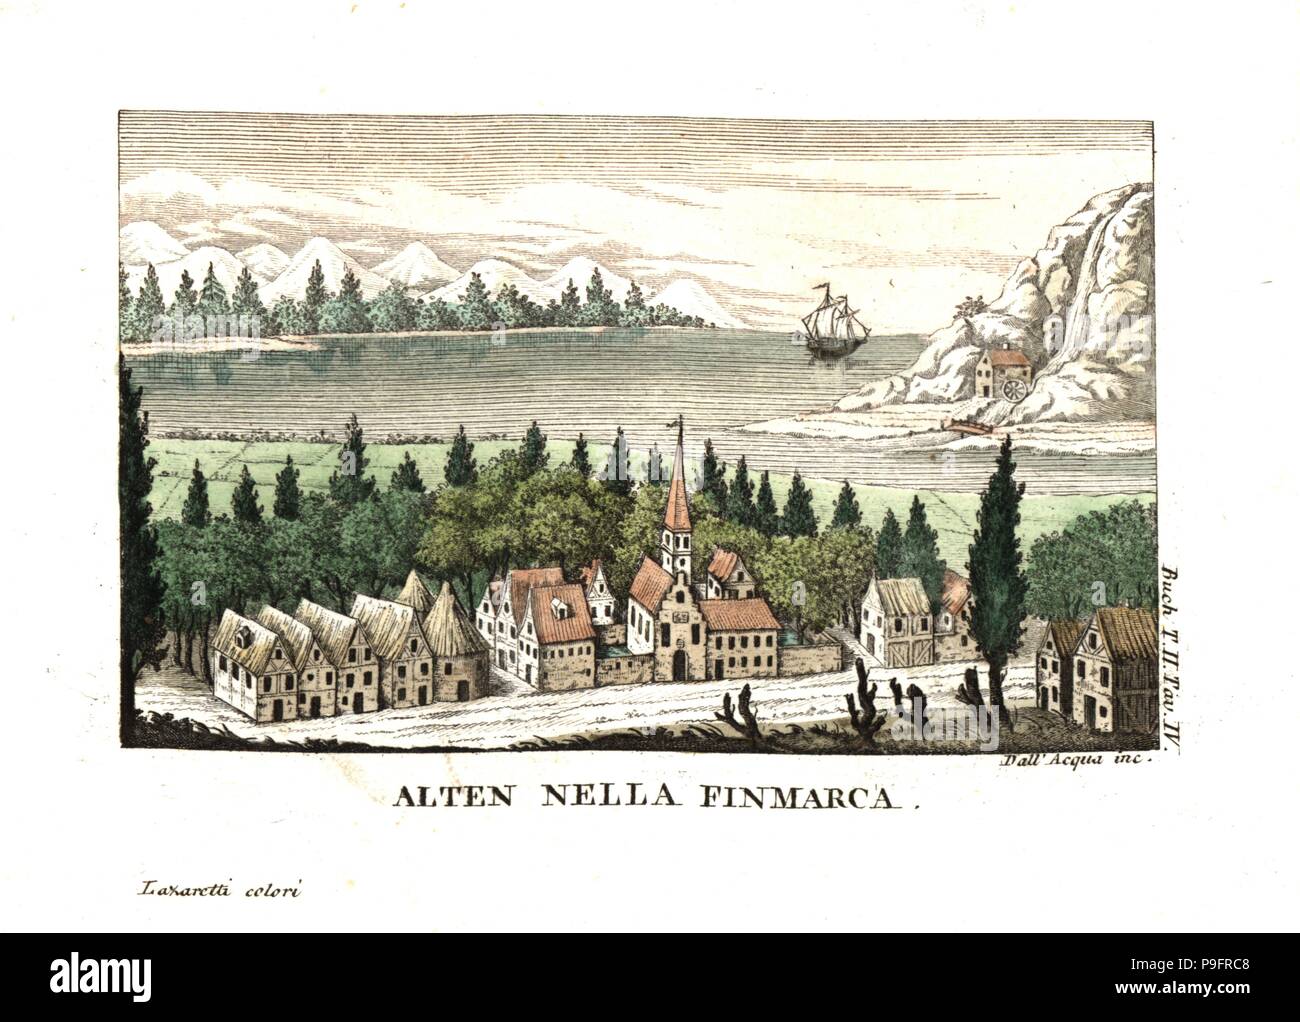 View of the town of Alta, Finnmark county, Norway. Illustration from Leopold von Buch’s Travels Through Norway and Lapland, 1813. Copperplate engraving by Dell'Acqua handcoloured by Lazaretti from Giovanni Battista Sonzogno’s Collection of the Most Interesting Voyages (Raccolta de Viaggi Piu Interessanti), Milan, 1815-1817. Stock Photo